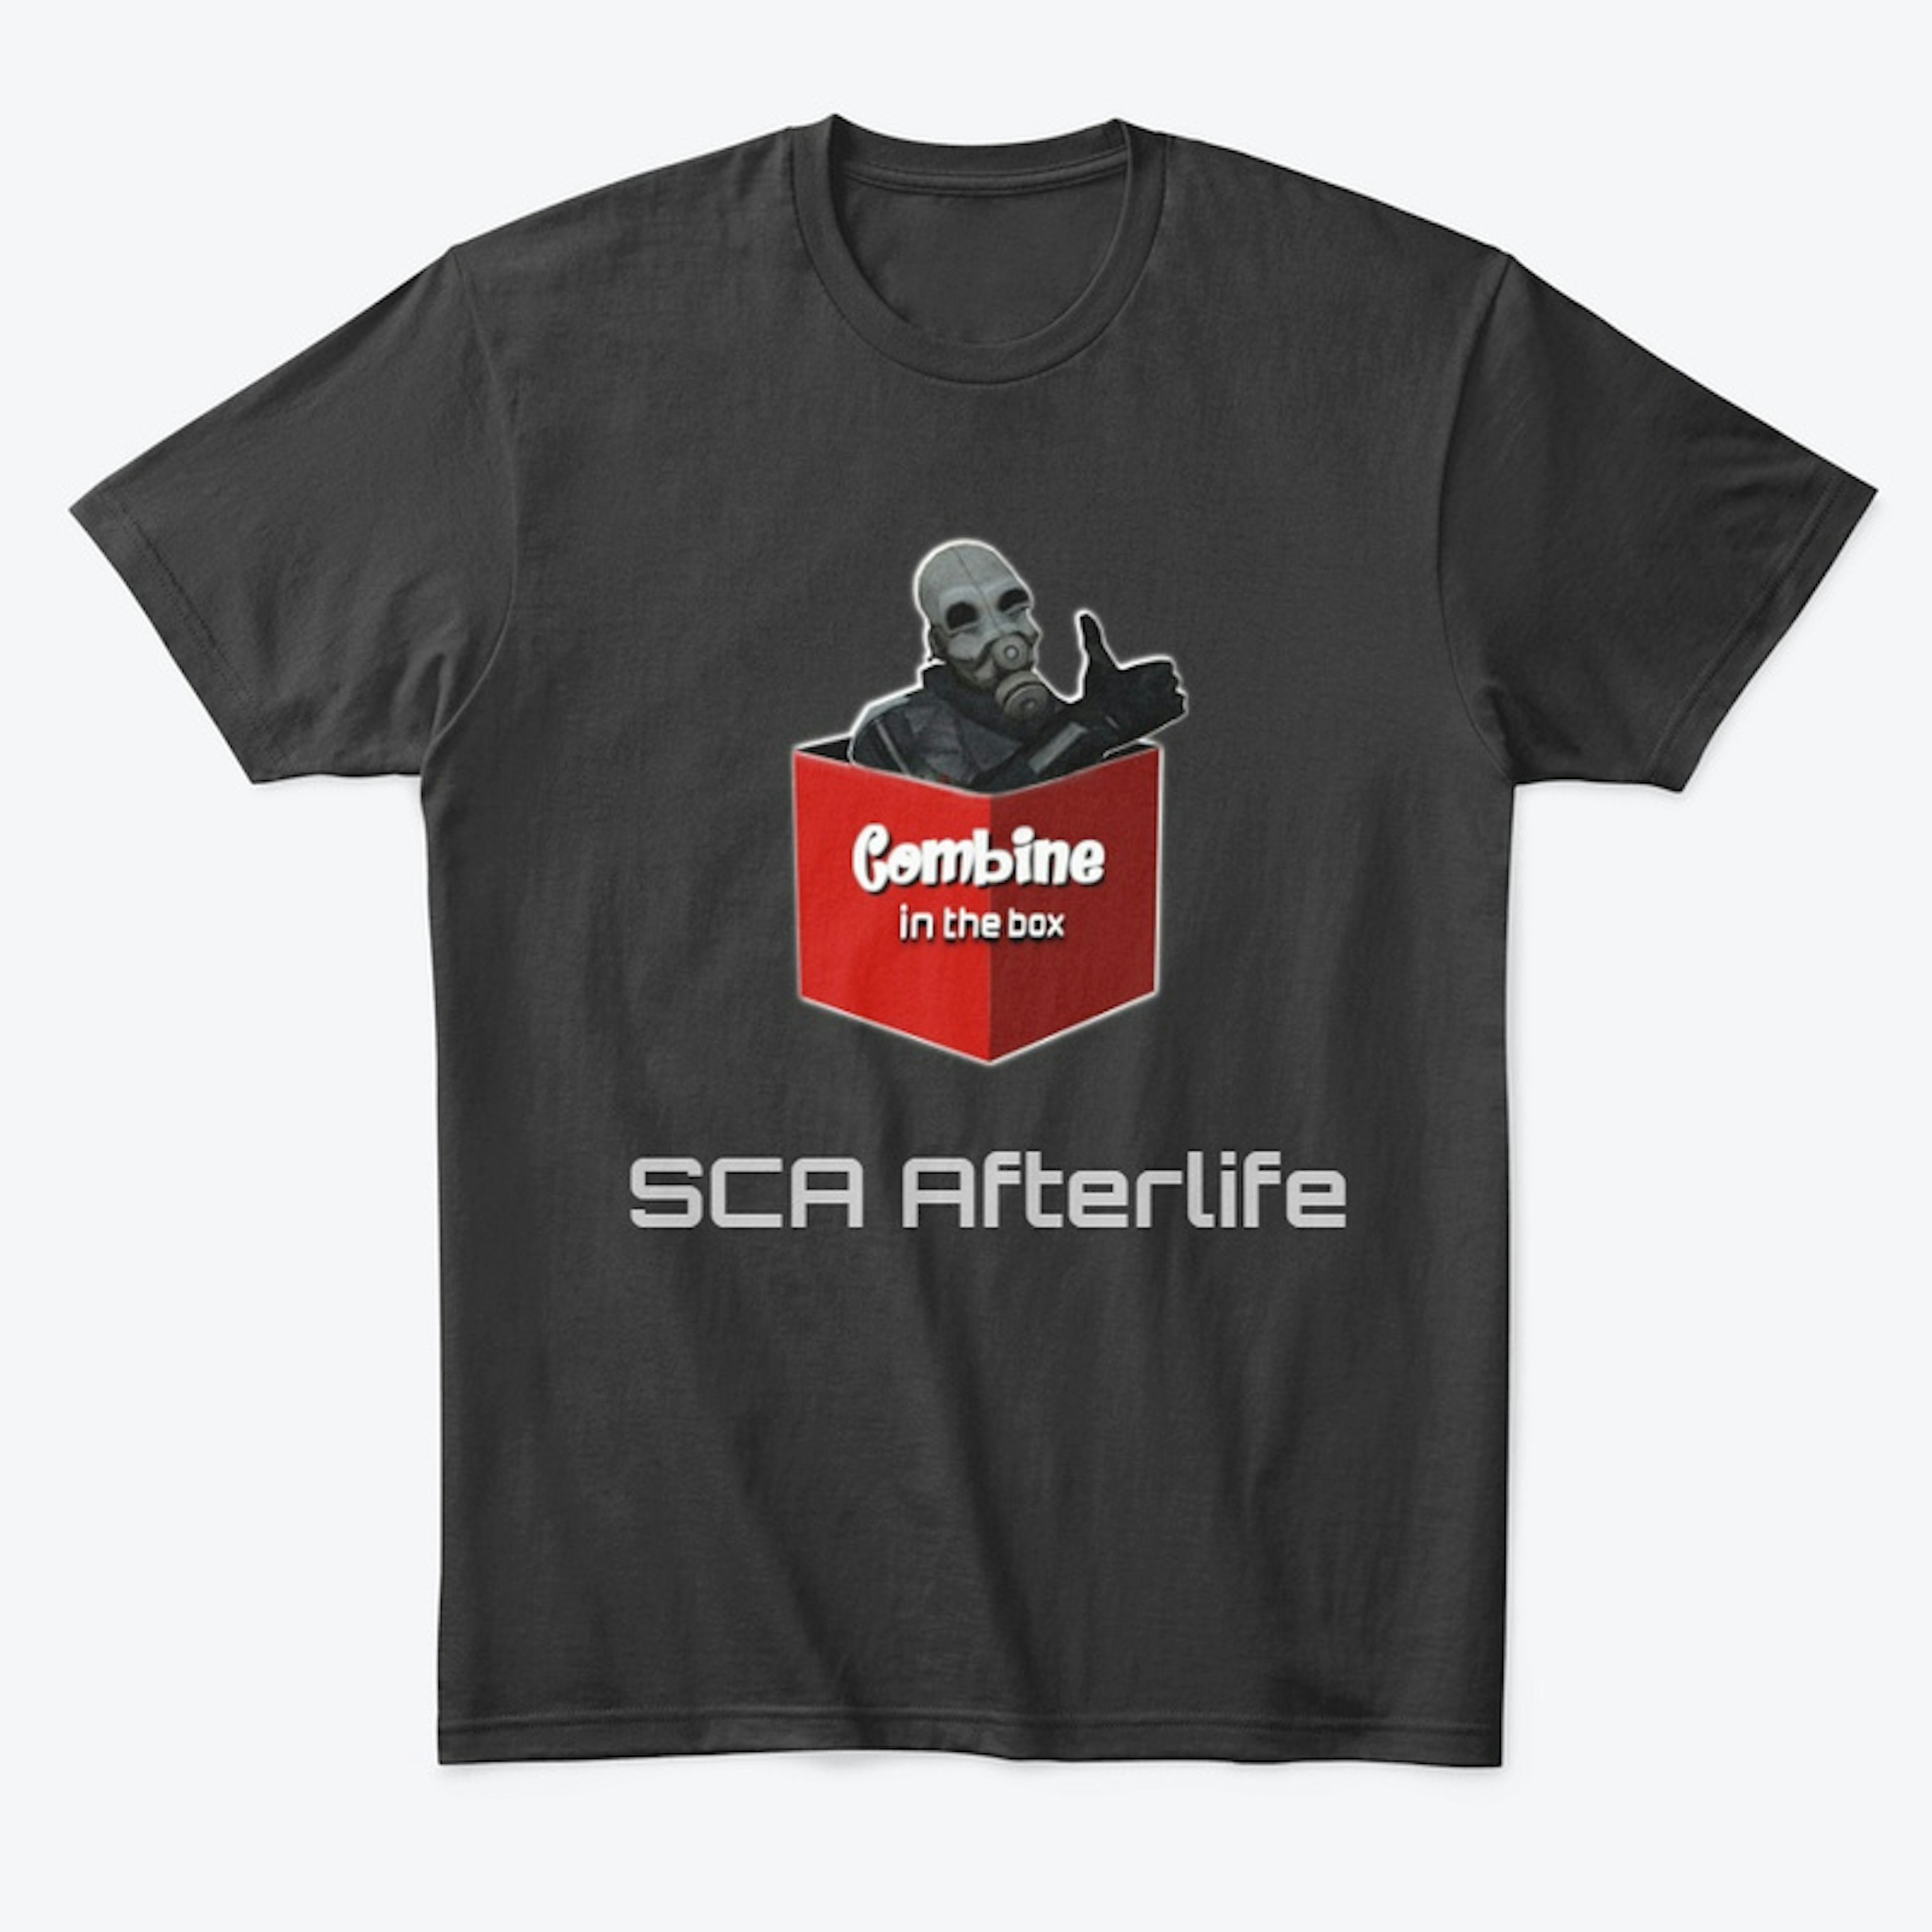 SCA Afterlife Combine in the Box T-shirt